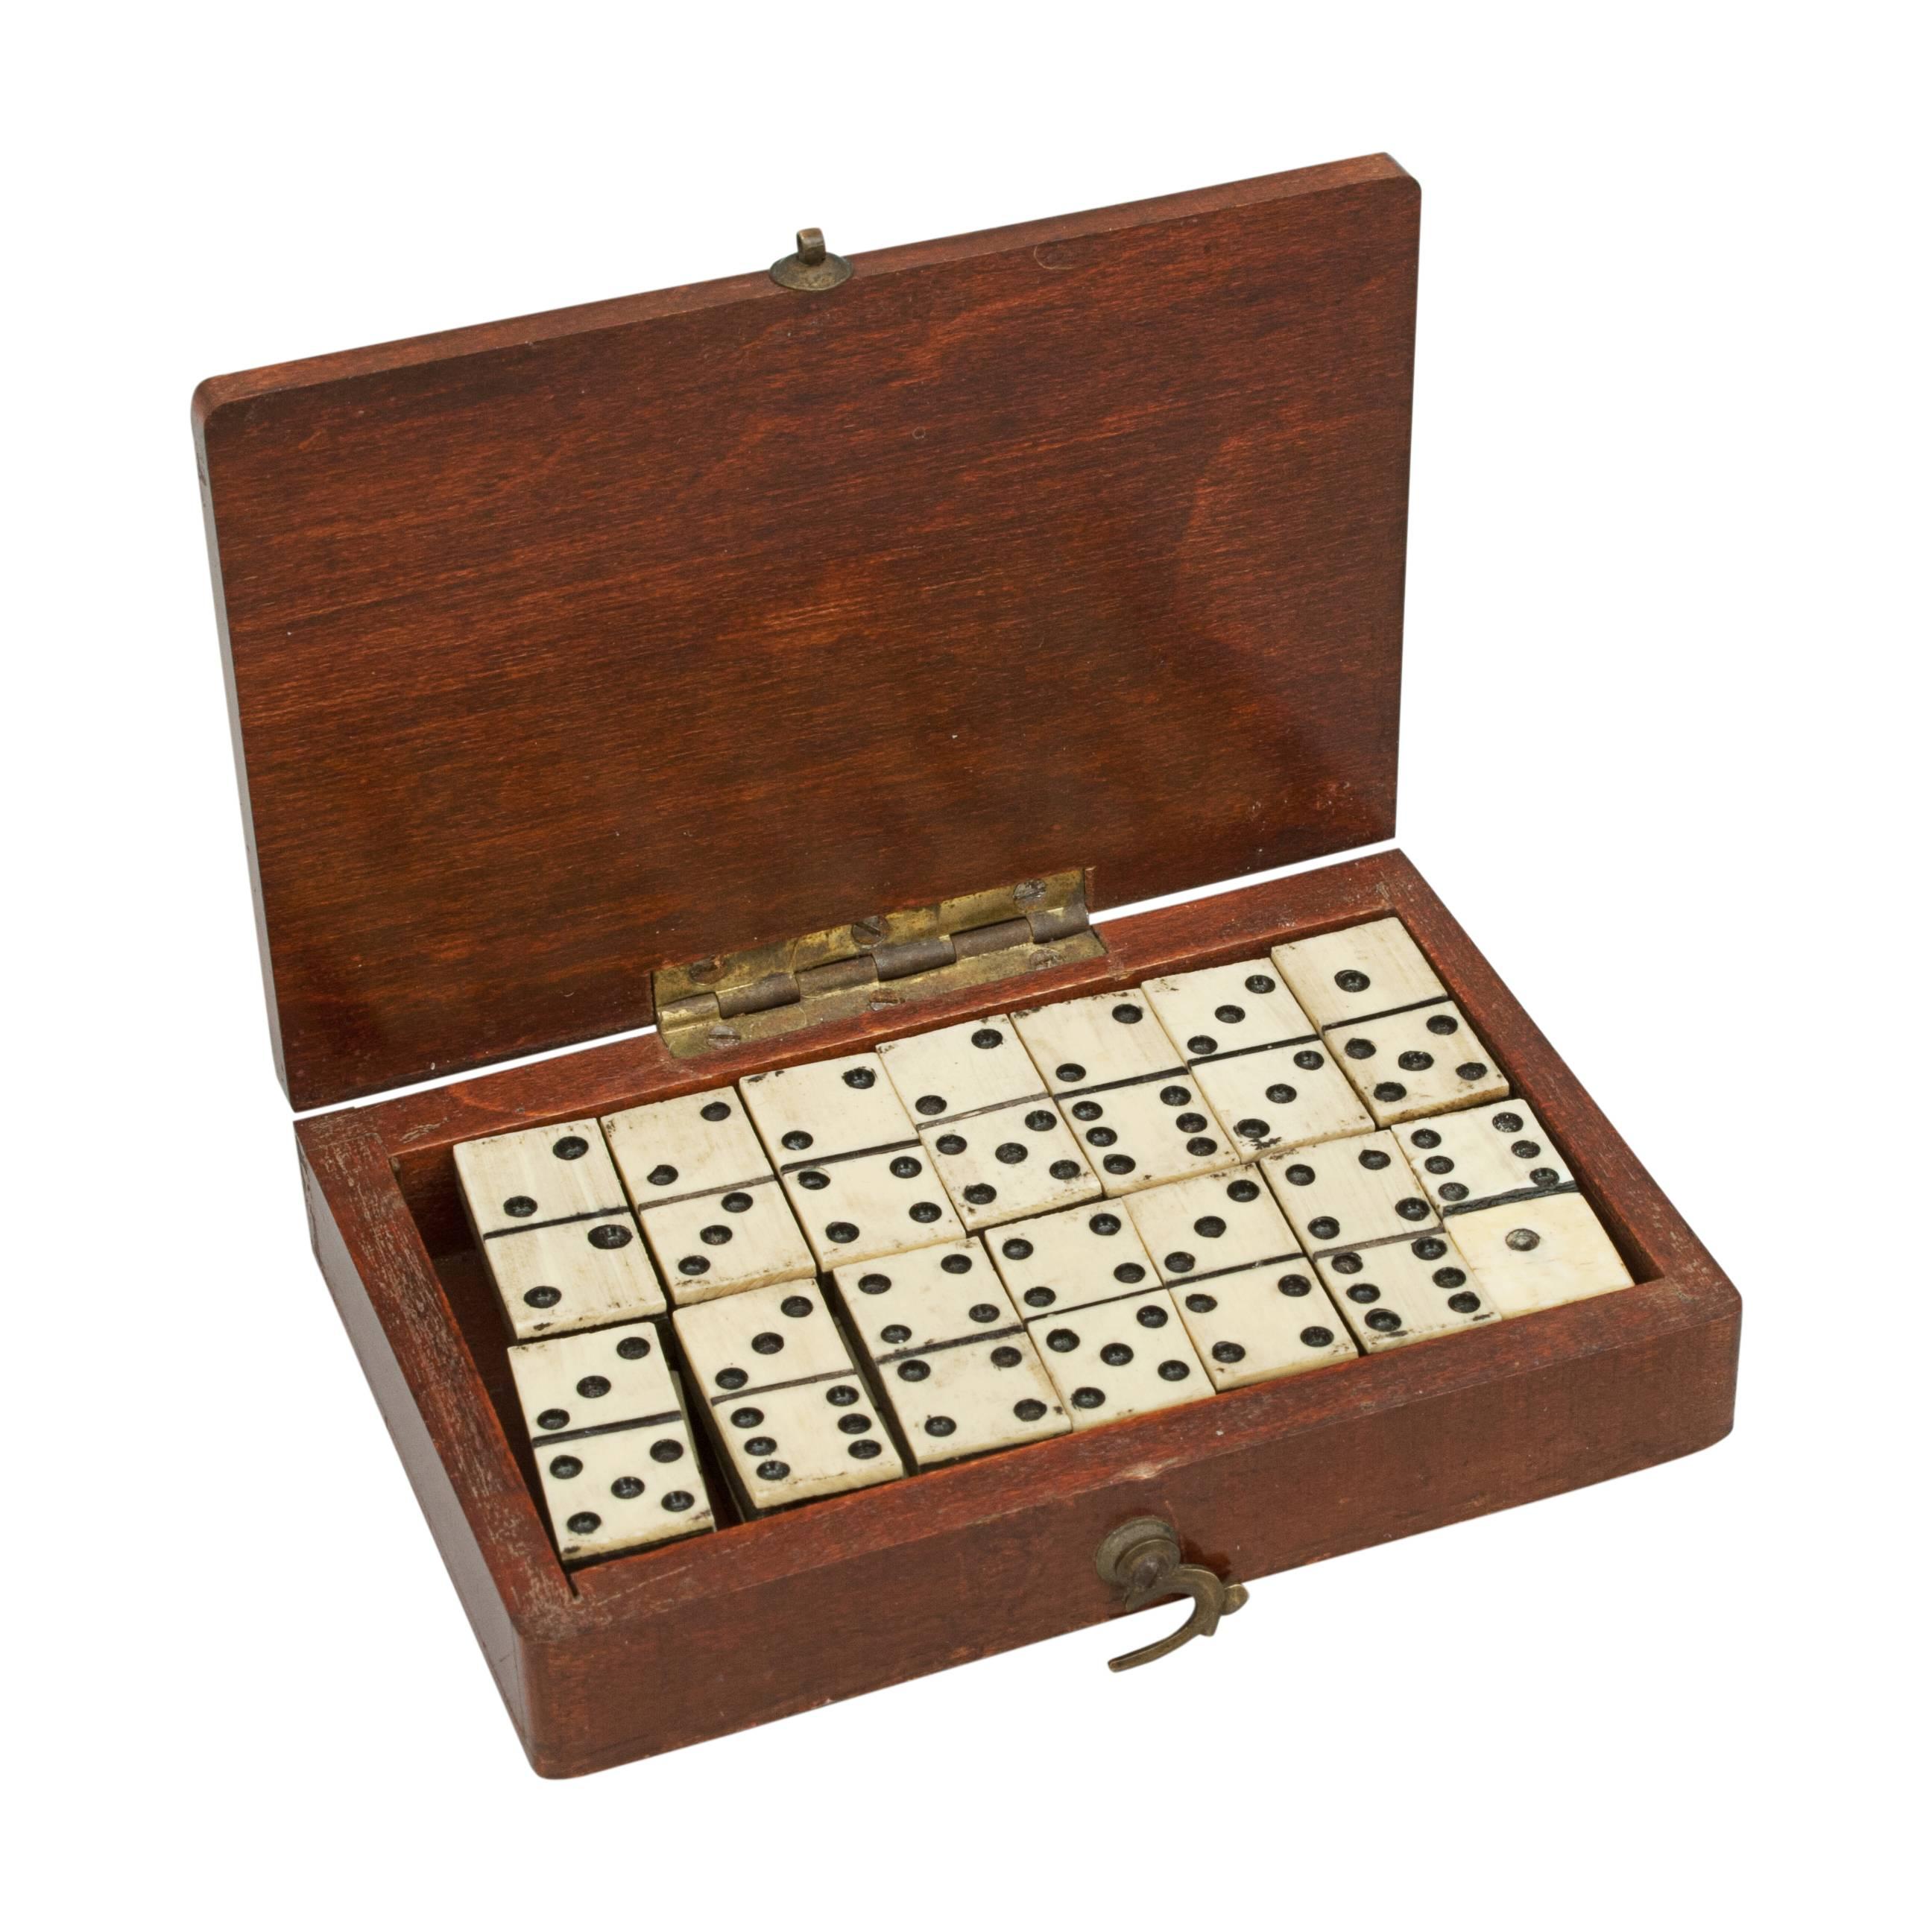 Miniature Domino set in mahogany box.
A set of pocket dominoes in a original mahogany box. Each domino is made of ebony and bone. There are 28 dominoes in total and each domino is sized: 2 cm wide, 1 cm deep, ½ cm high. A very unusual set of